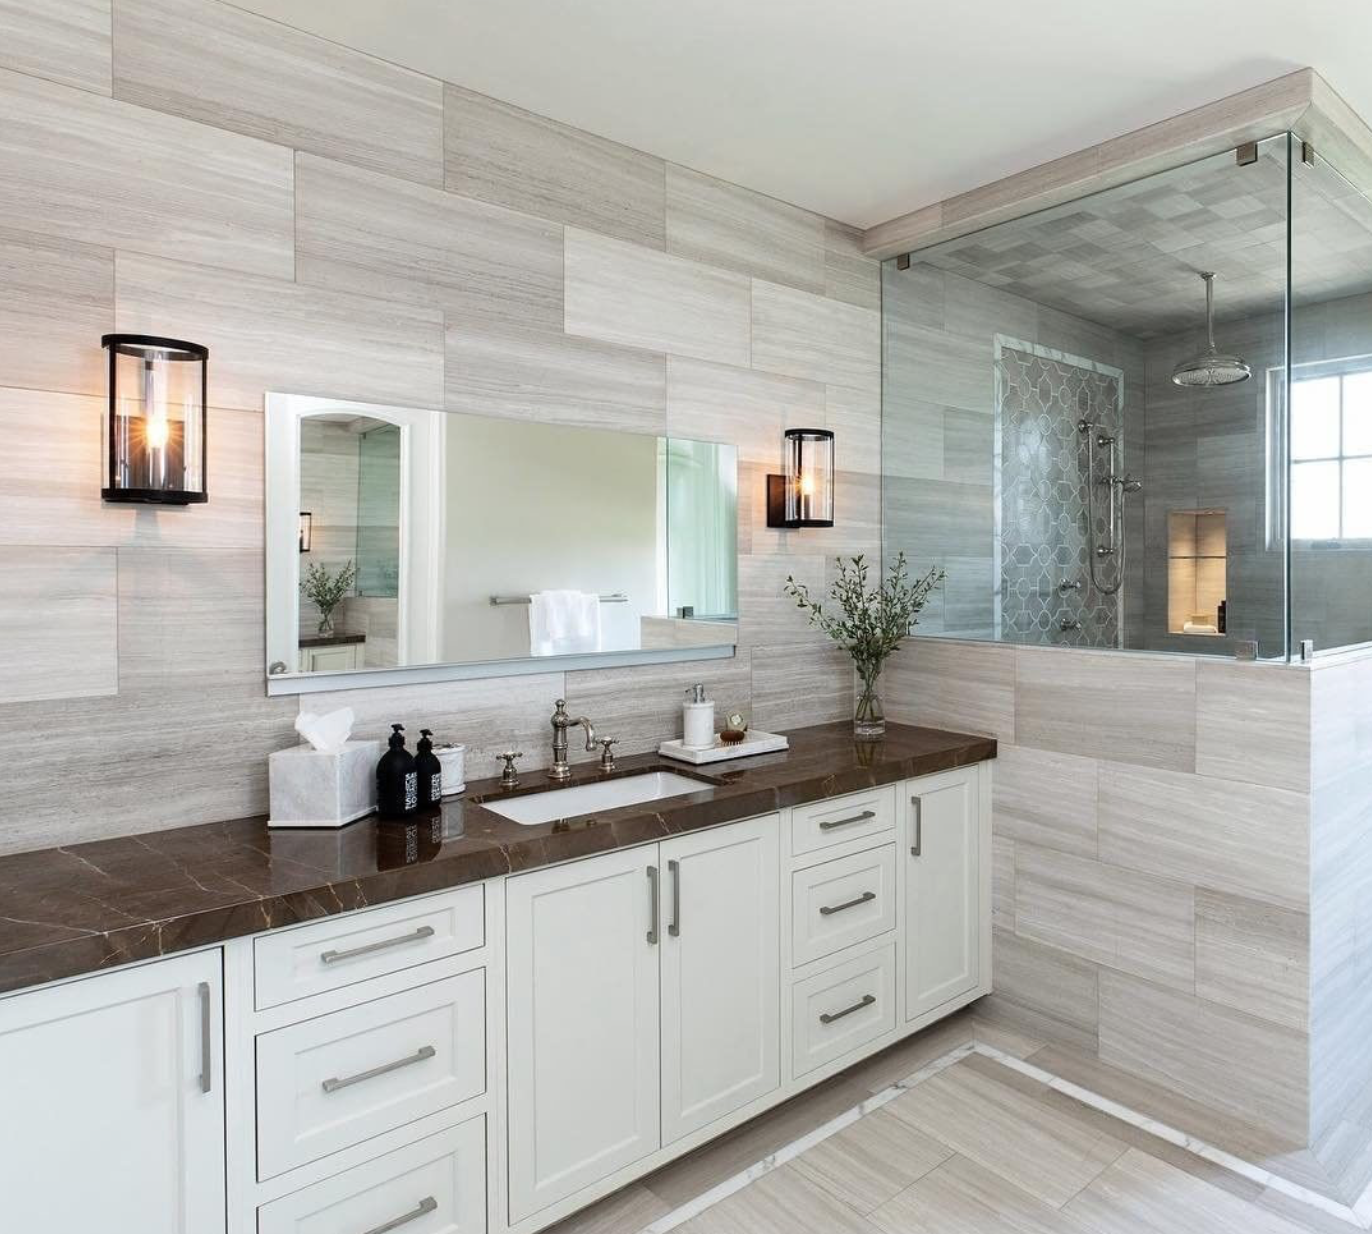  Clean lines and a neutral color palette make this mater bathroom feel expansive and airy. Design by  @anneraedesign ; photo by  @jenny_siegwart . 